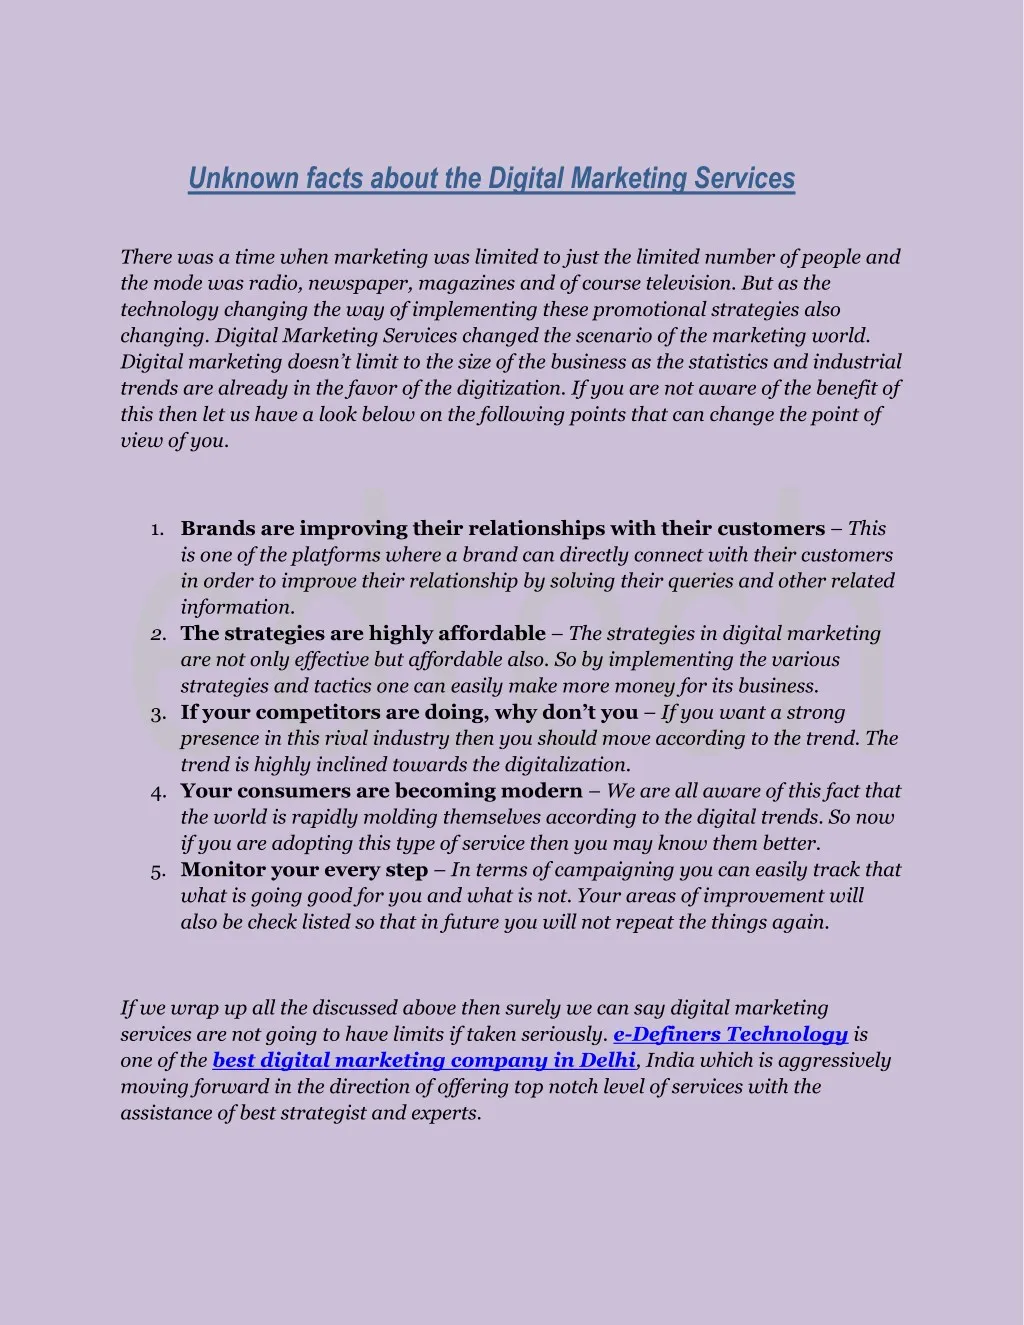 unknown facts about the digital marketing services